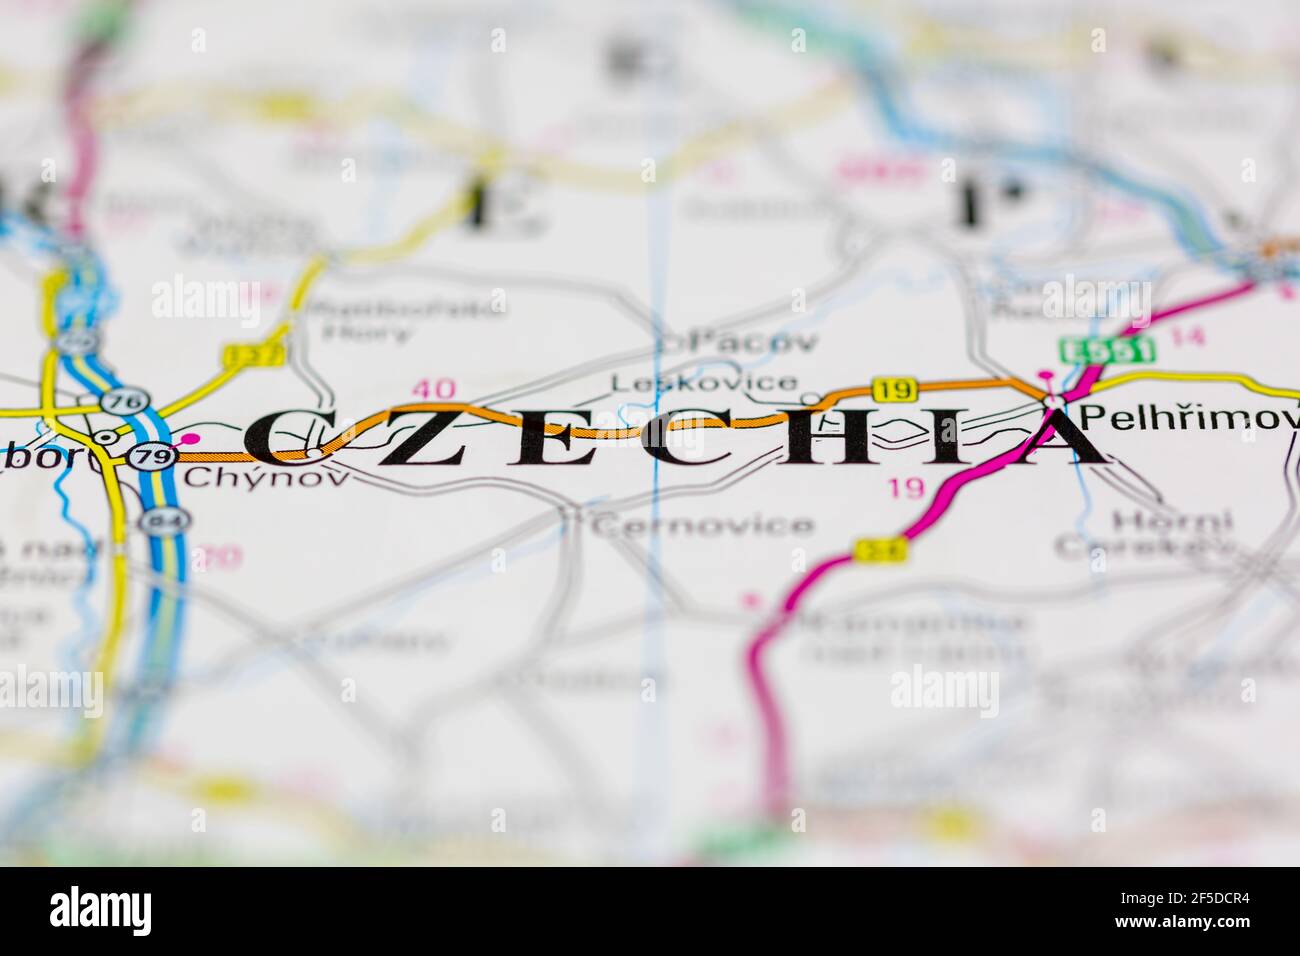 Czechia and surrounding areas Shown on a Geography map or road map Stock Photo